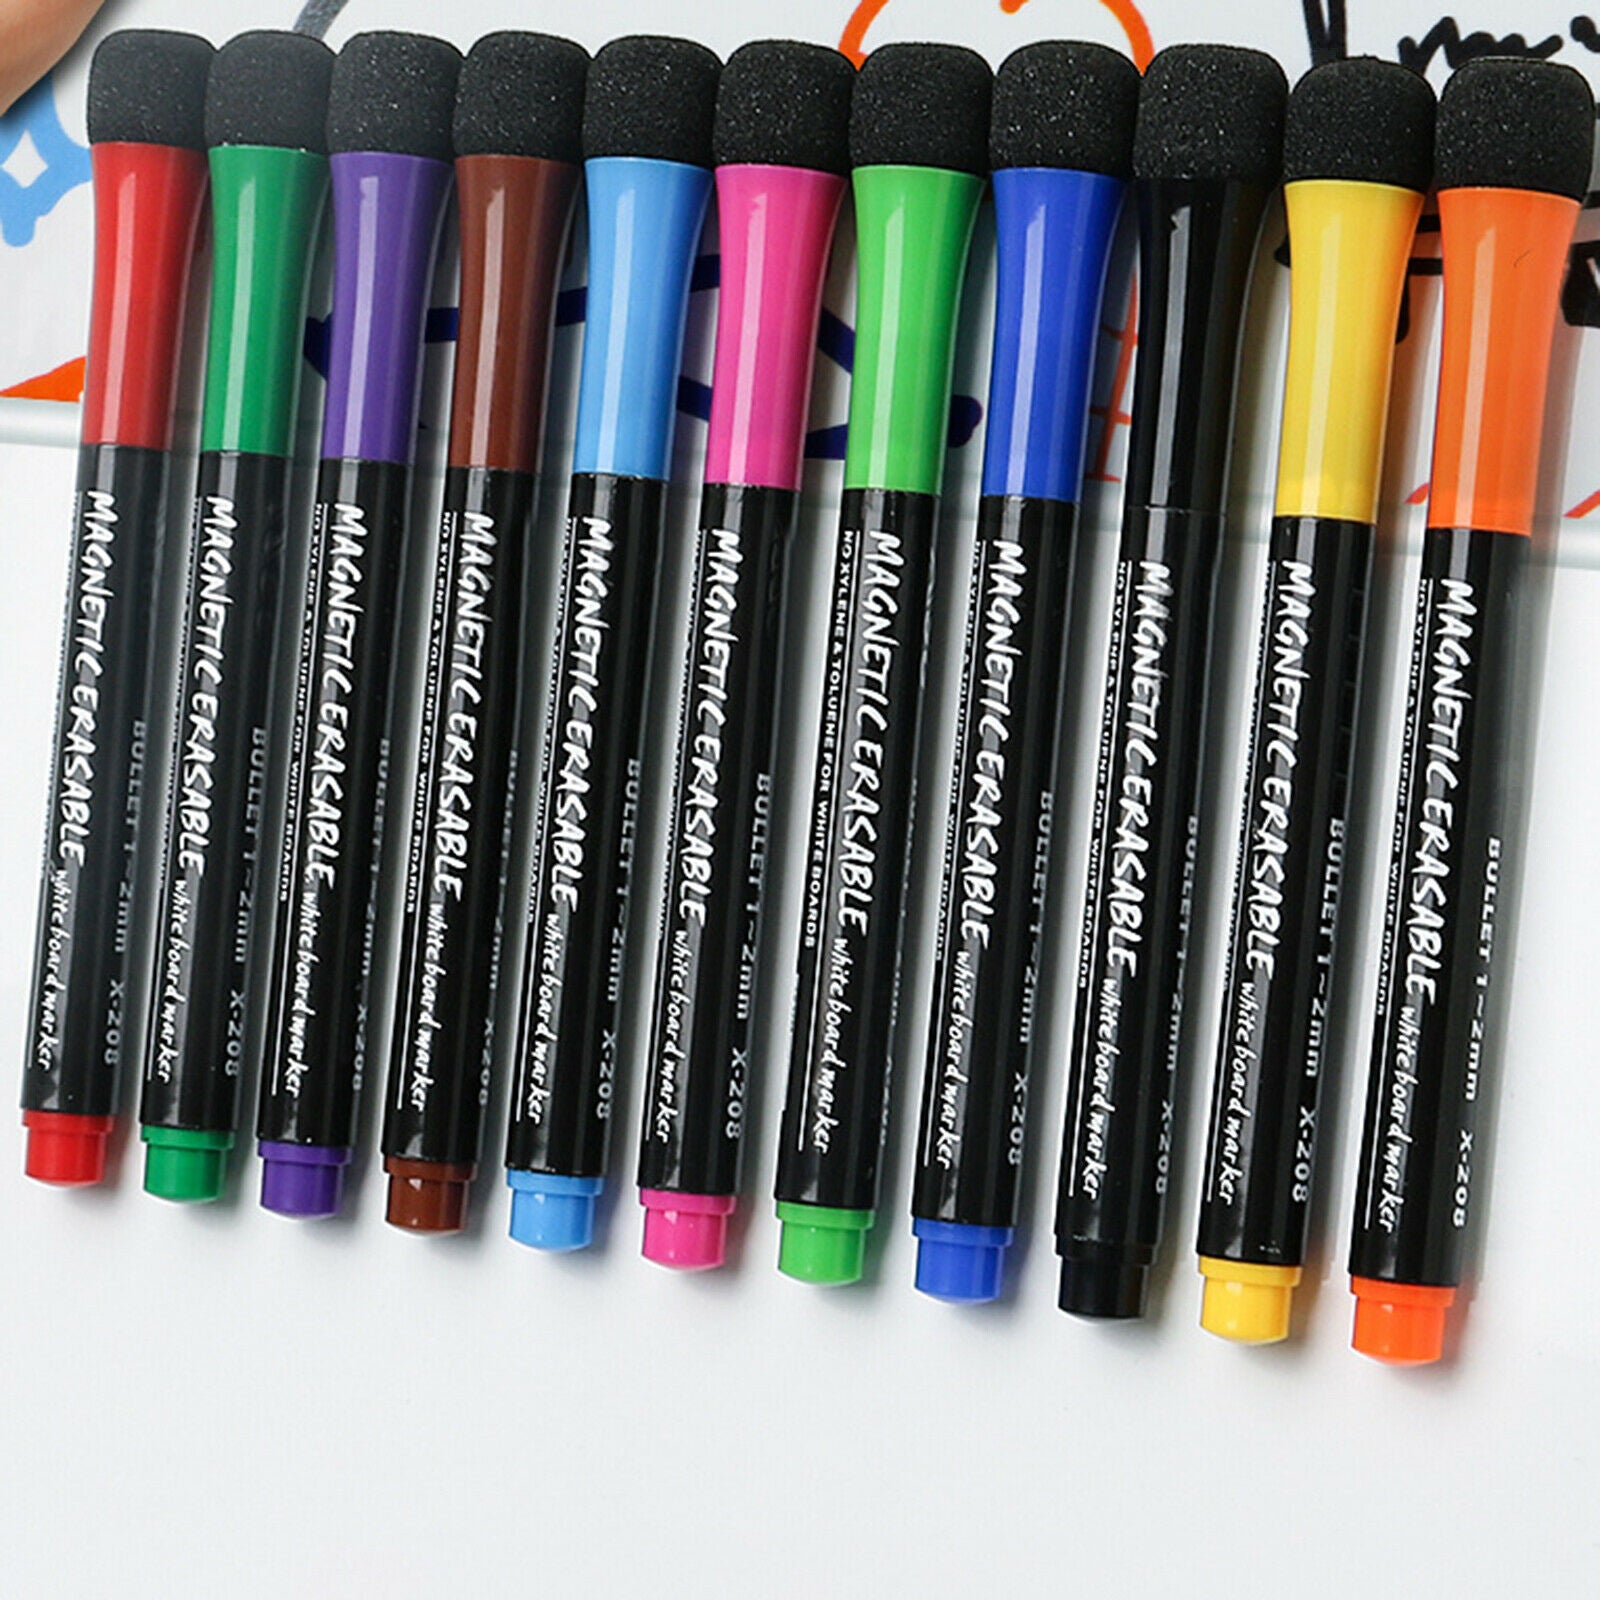 12 Pack Dry Erase Mirror Markers Erasable Whiteboard Maker Pens Low Odor